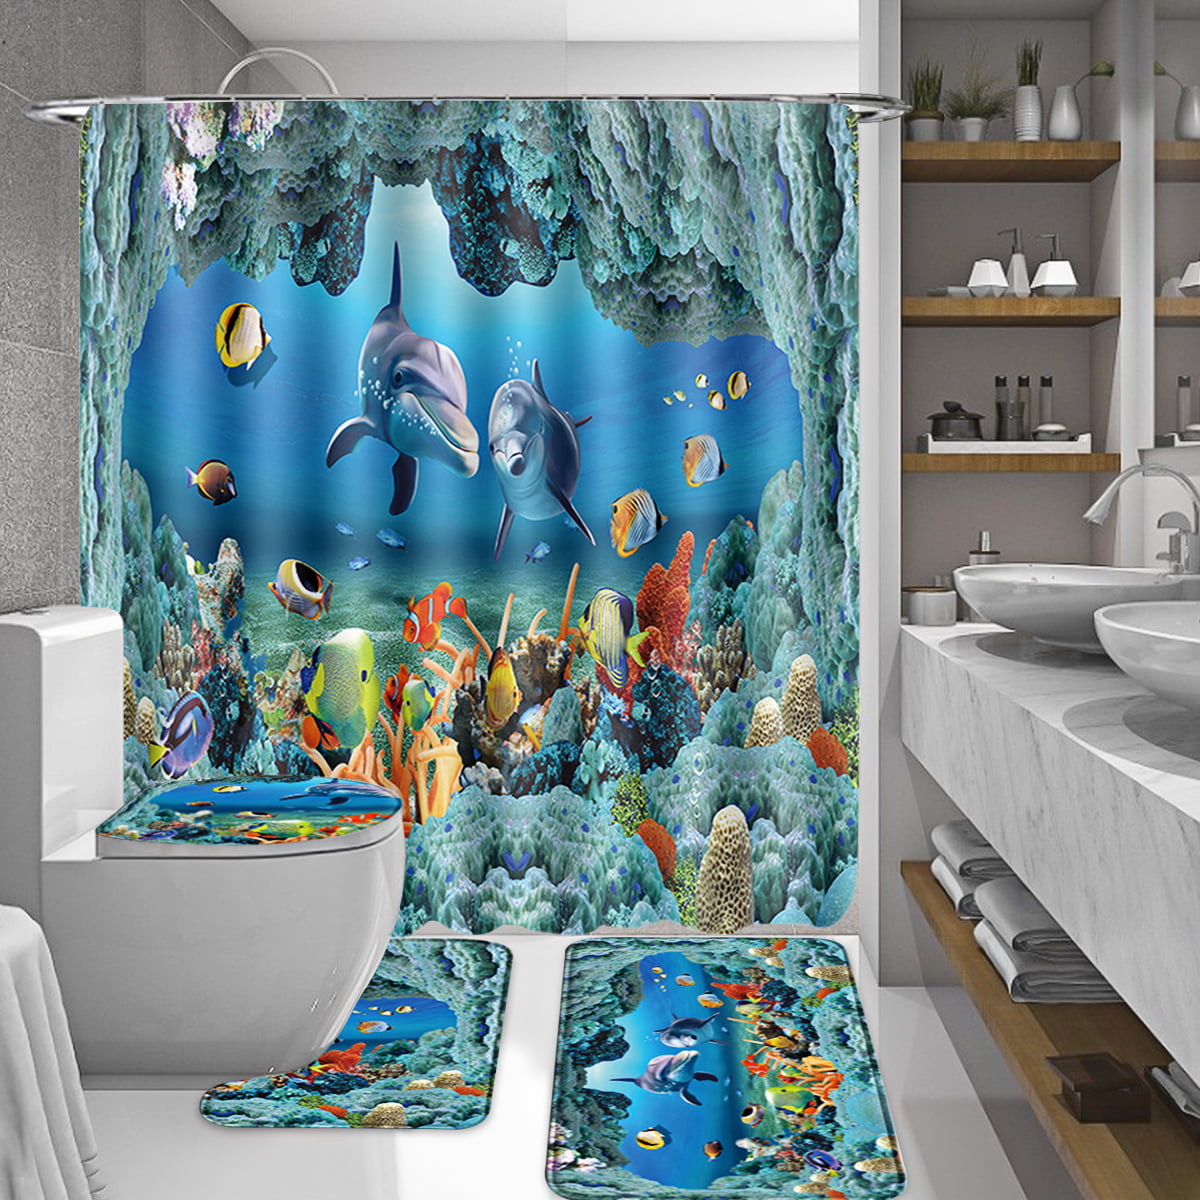 Ocean Dolphin Bathroom 3D Shower Curtain Set with Non Slip Toilet Cover Rugs Mat